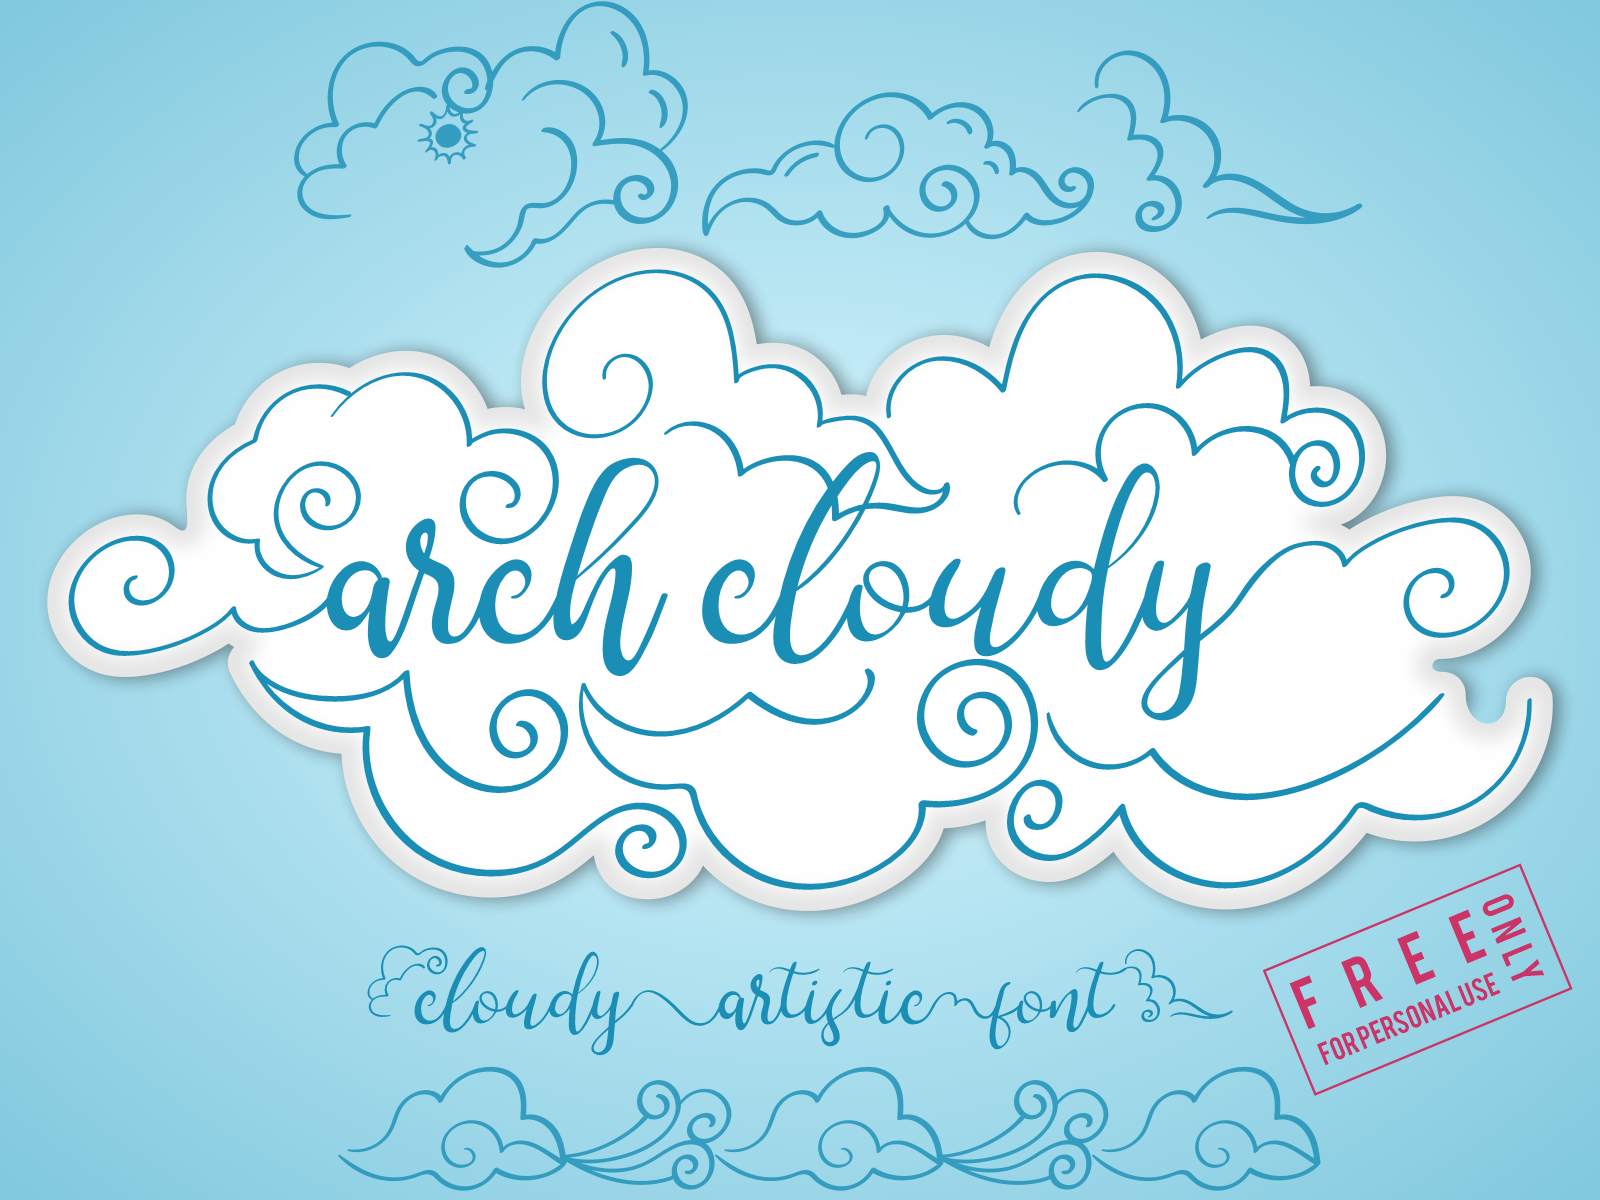 Arch Cloudy